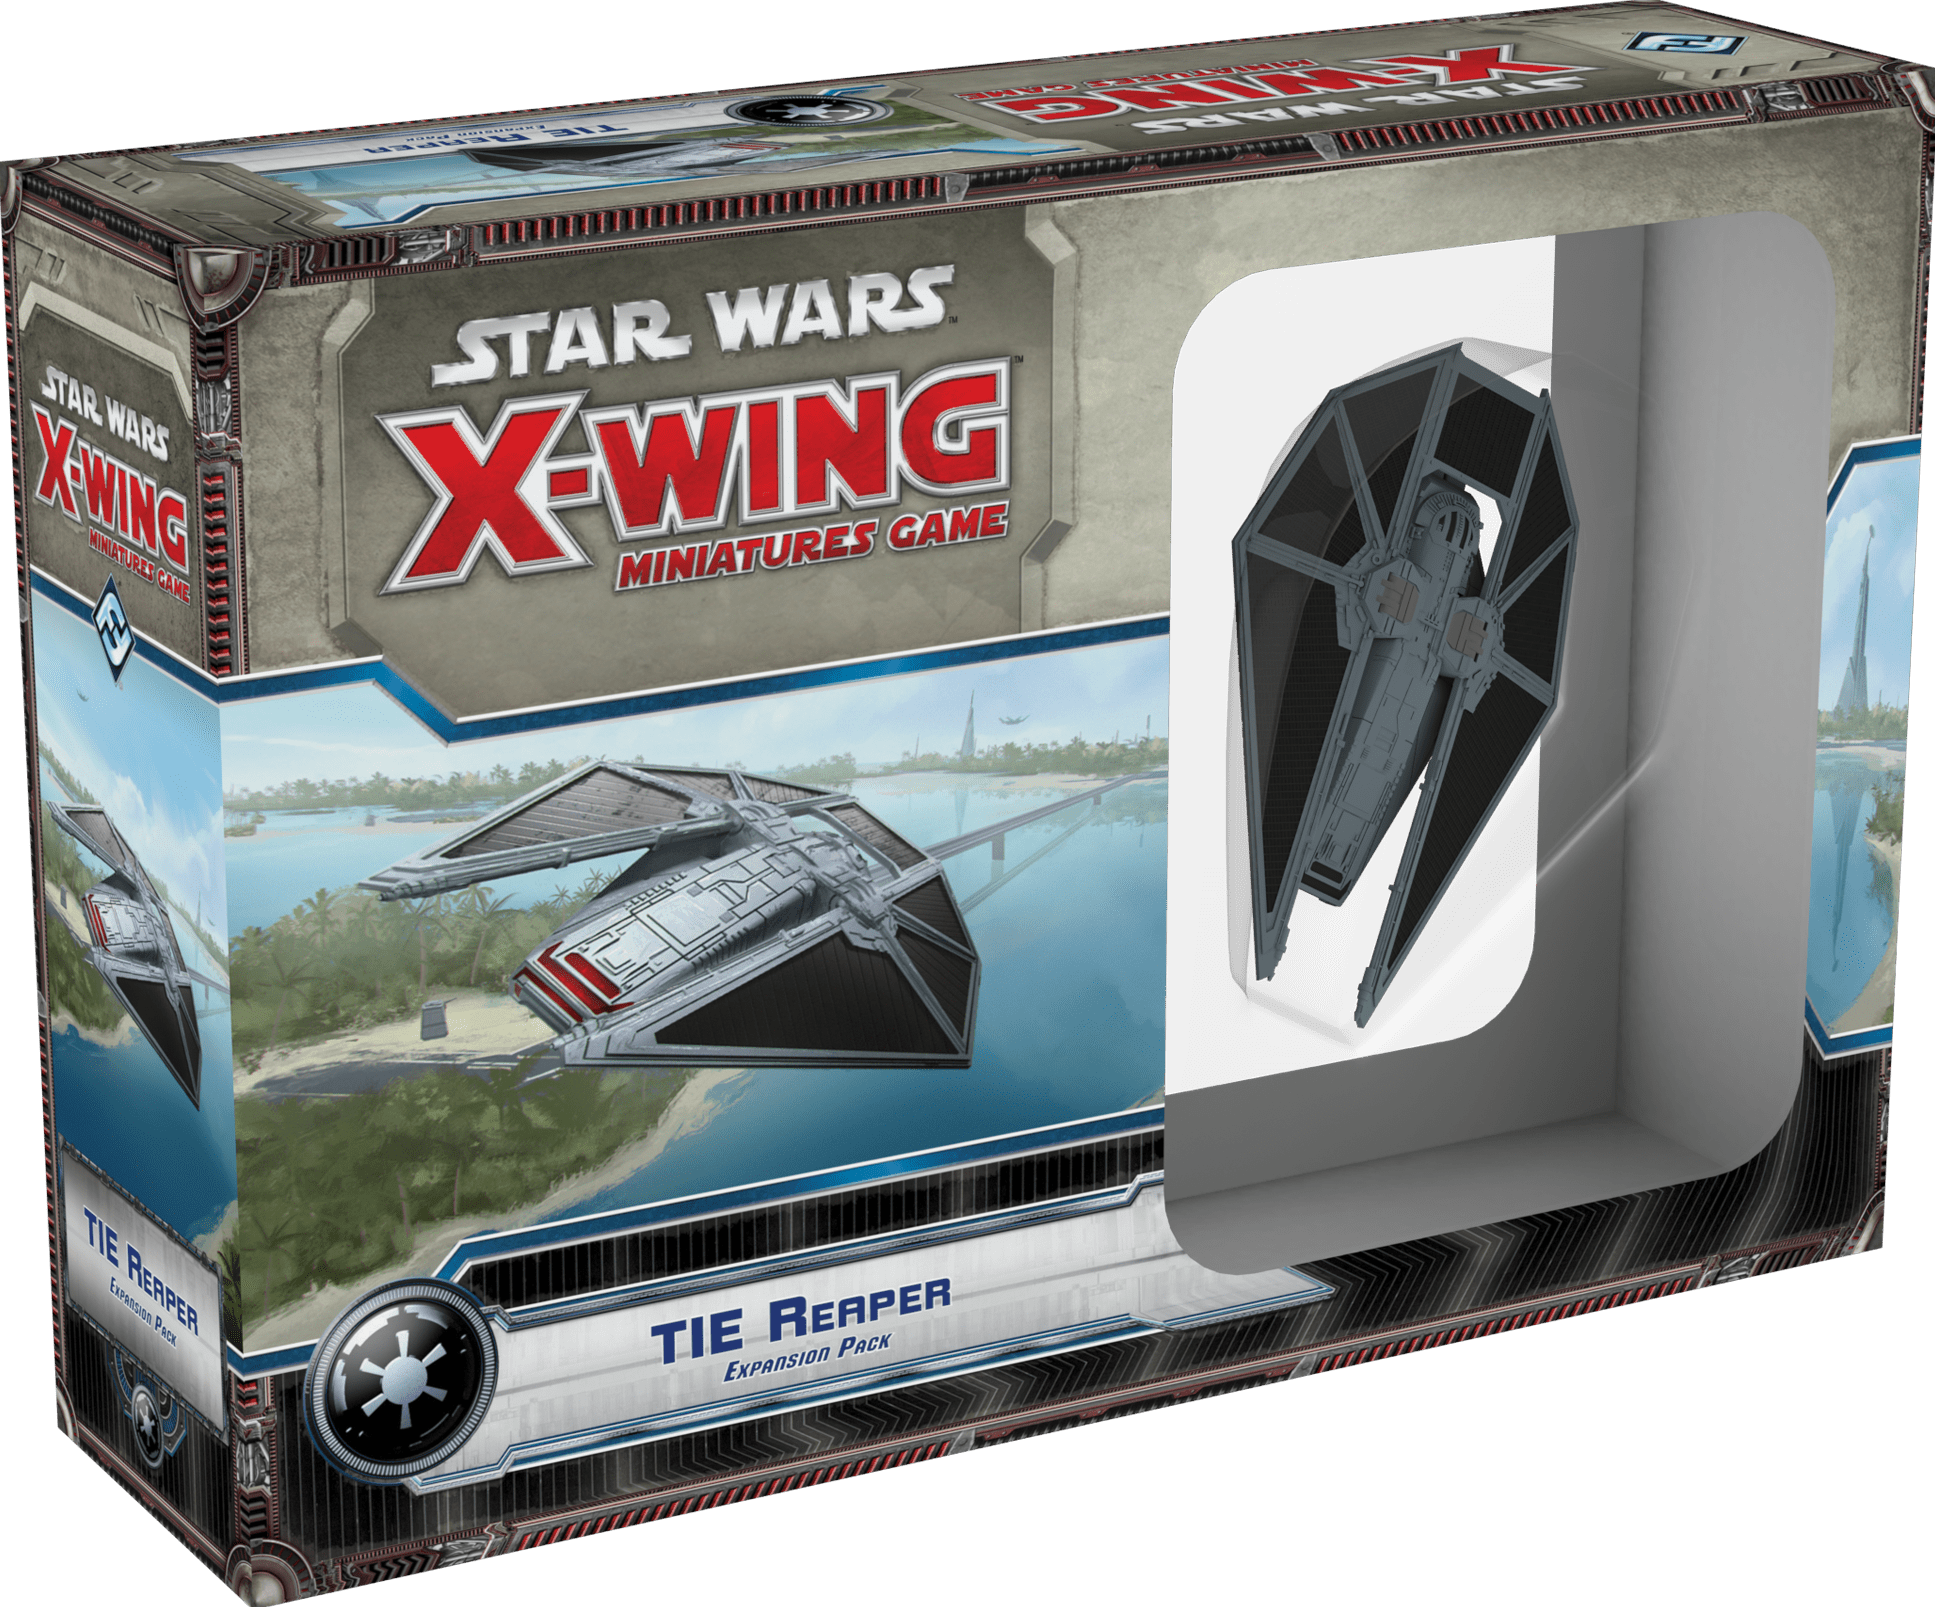 Star Wars: X-Wing Miniatures Game – TIE Reaper Expansion Pack